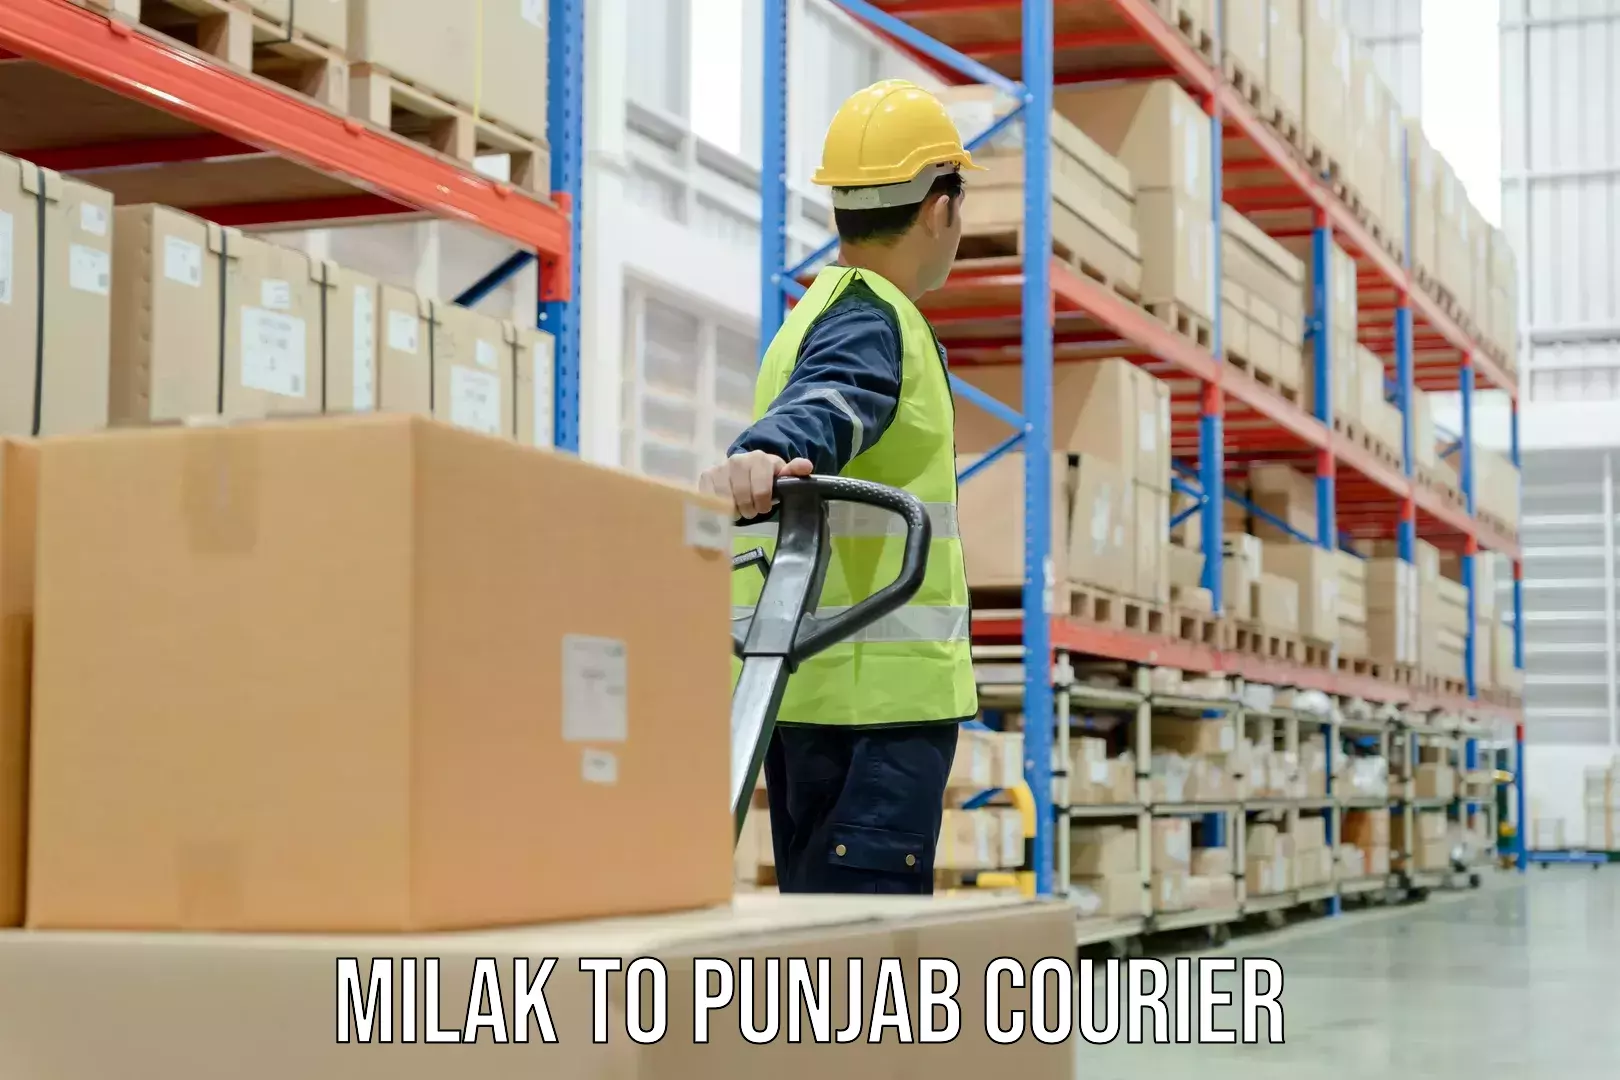 State-of-the-art courier technology Milak to Punjab